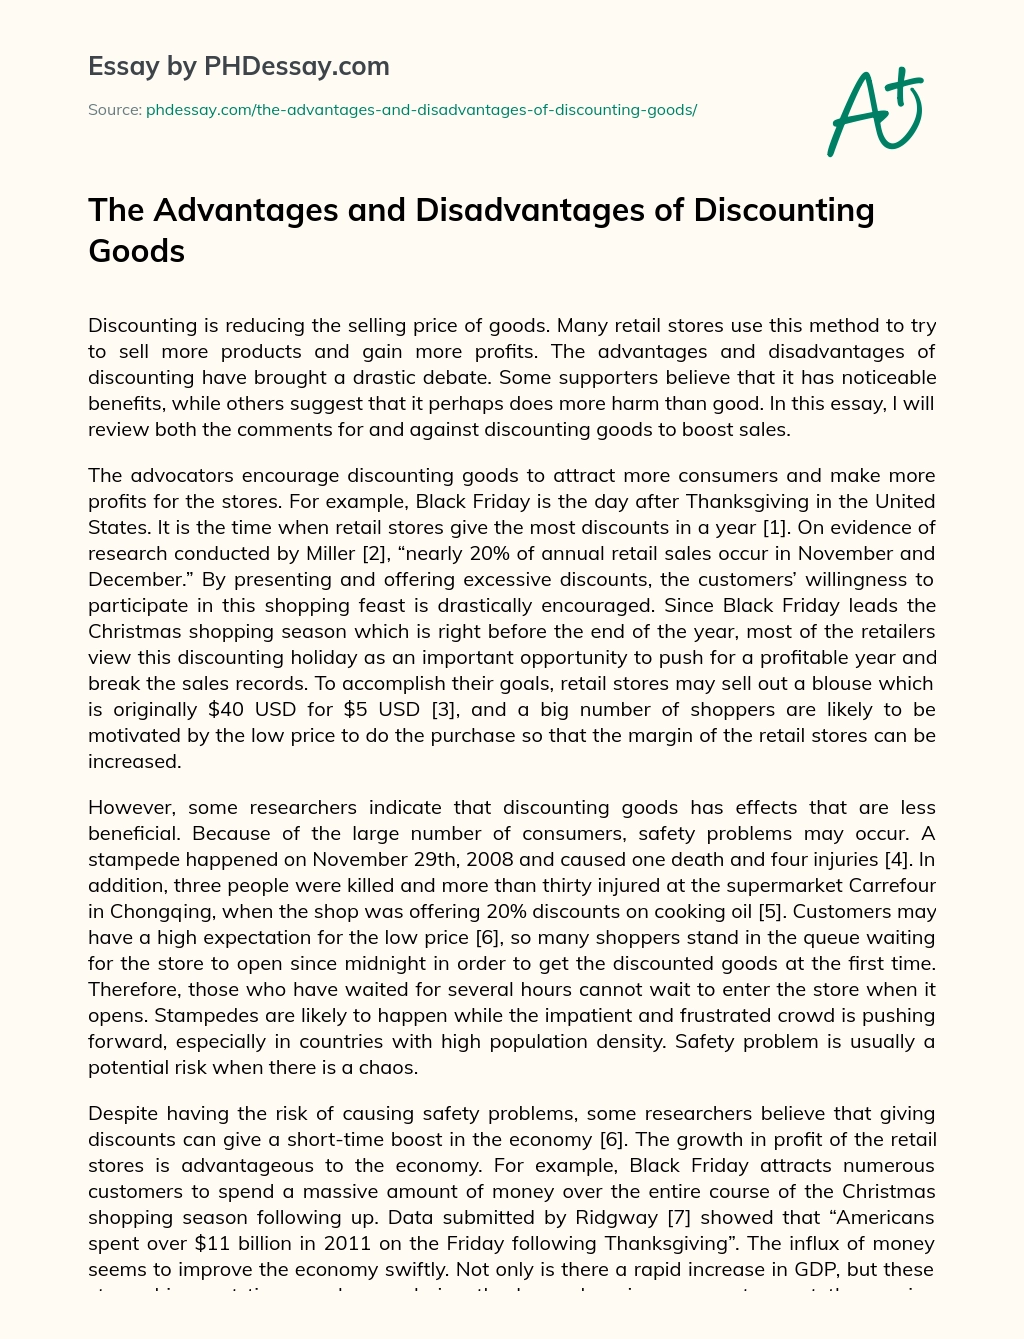 The Advantages and Disadvantages of Discounting Goods essay